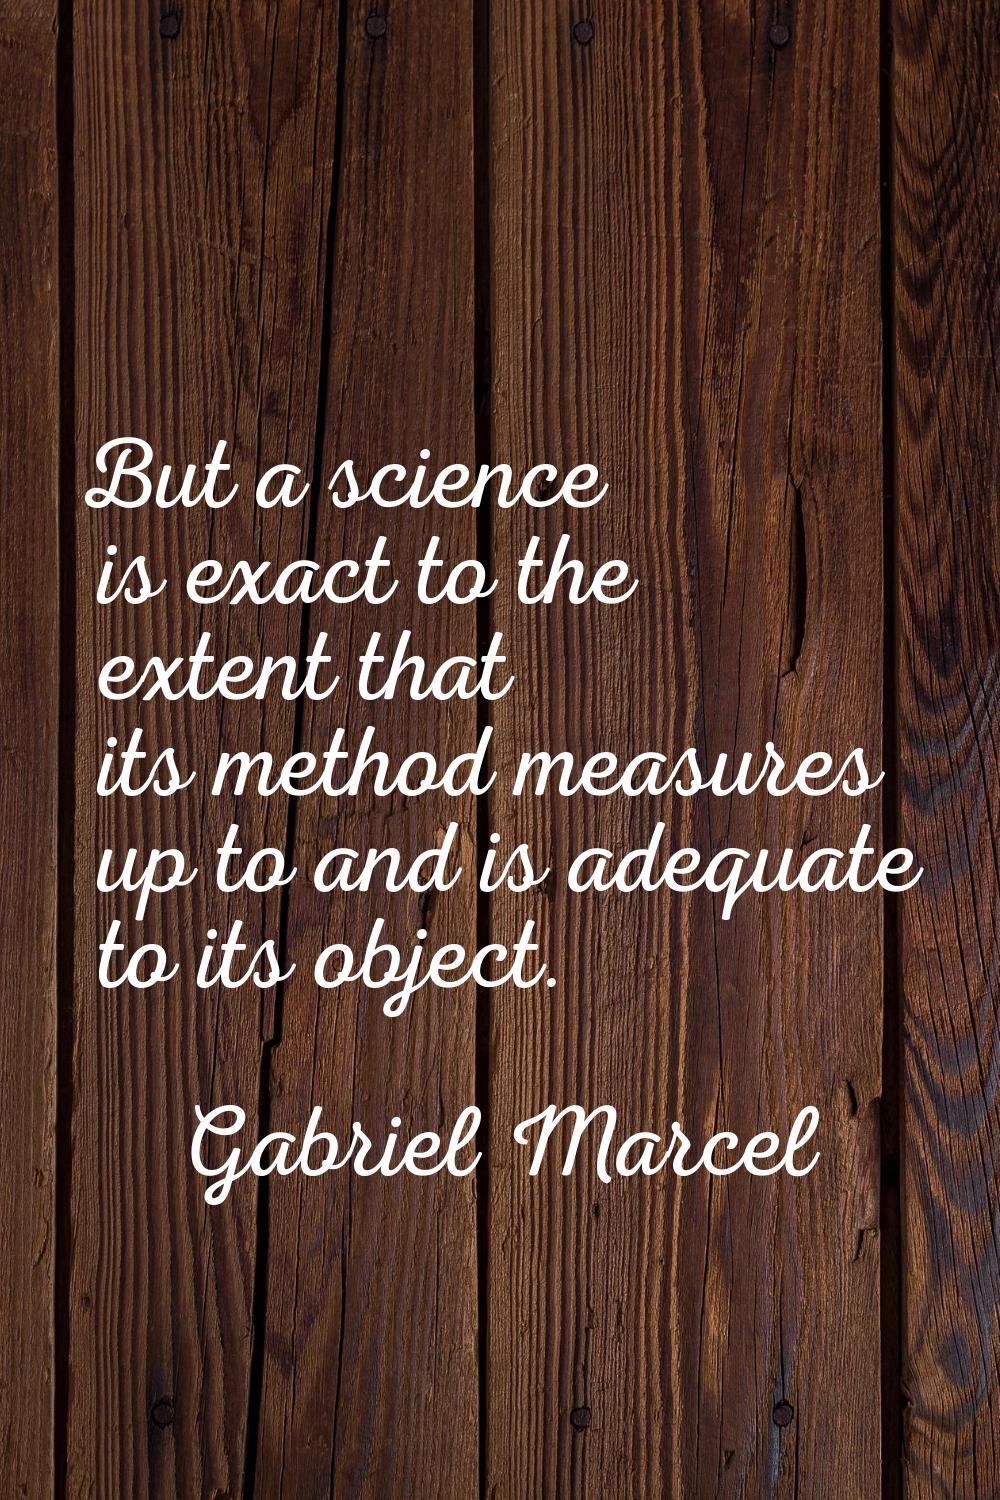 But a science is exact to the extent that its method measures up to and is adequate to its object.